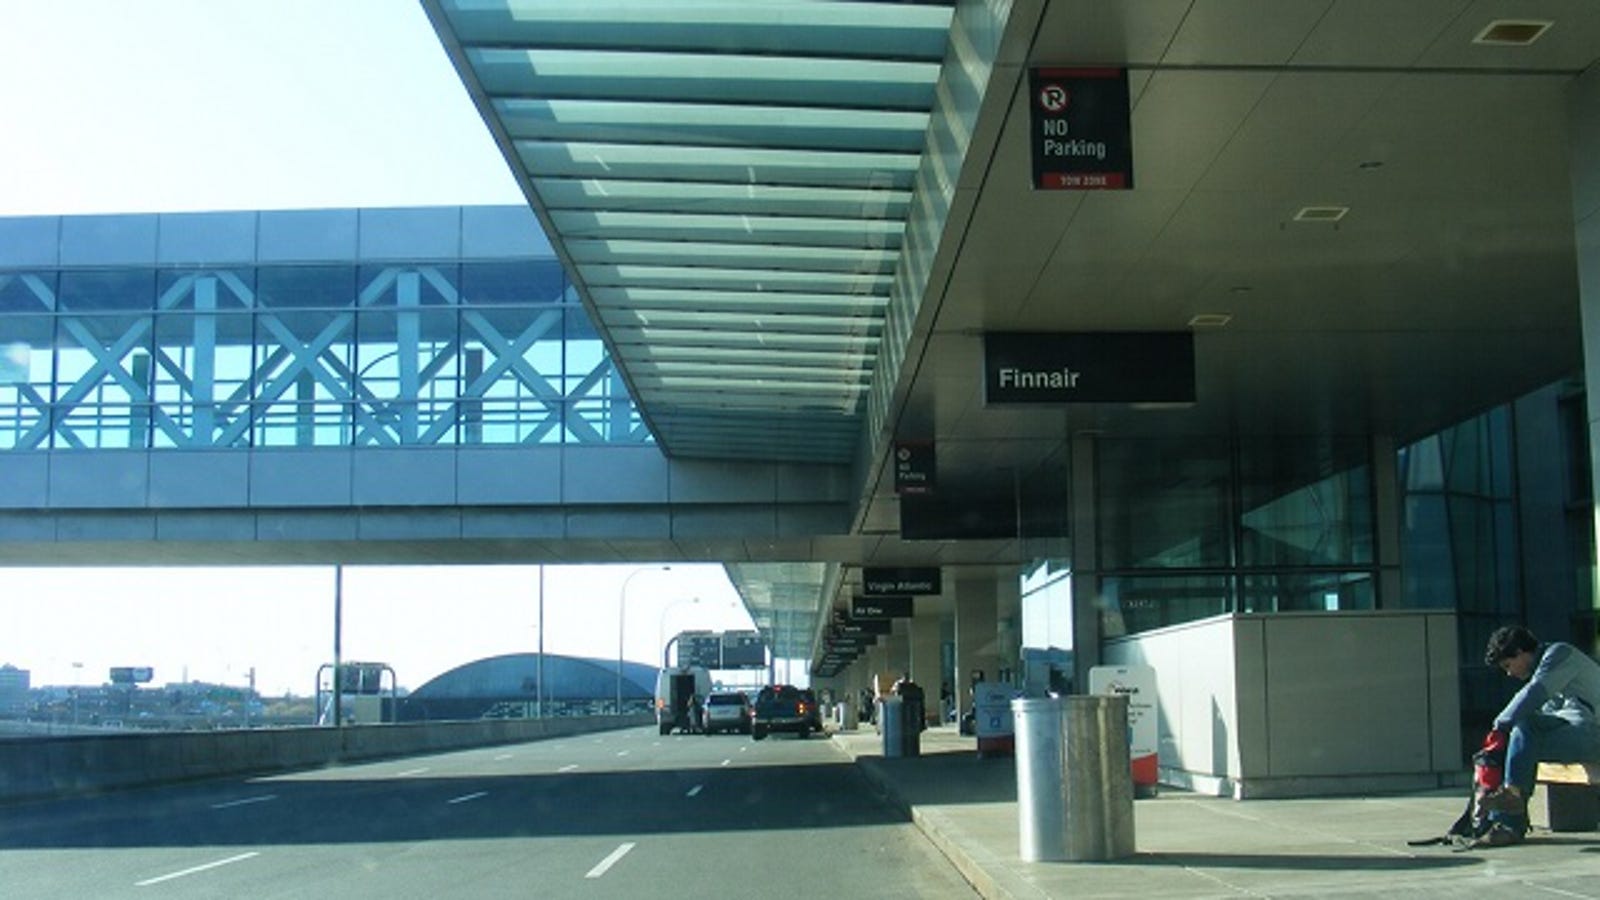 Pick People Up at the Departure Terminal to Avoid Airport Traffic